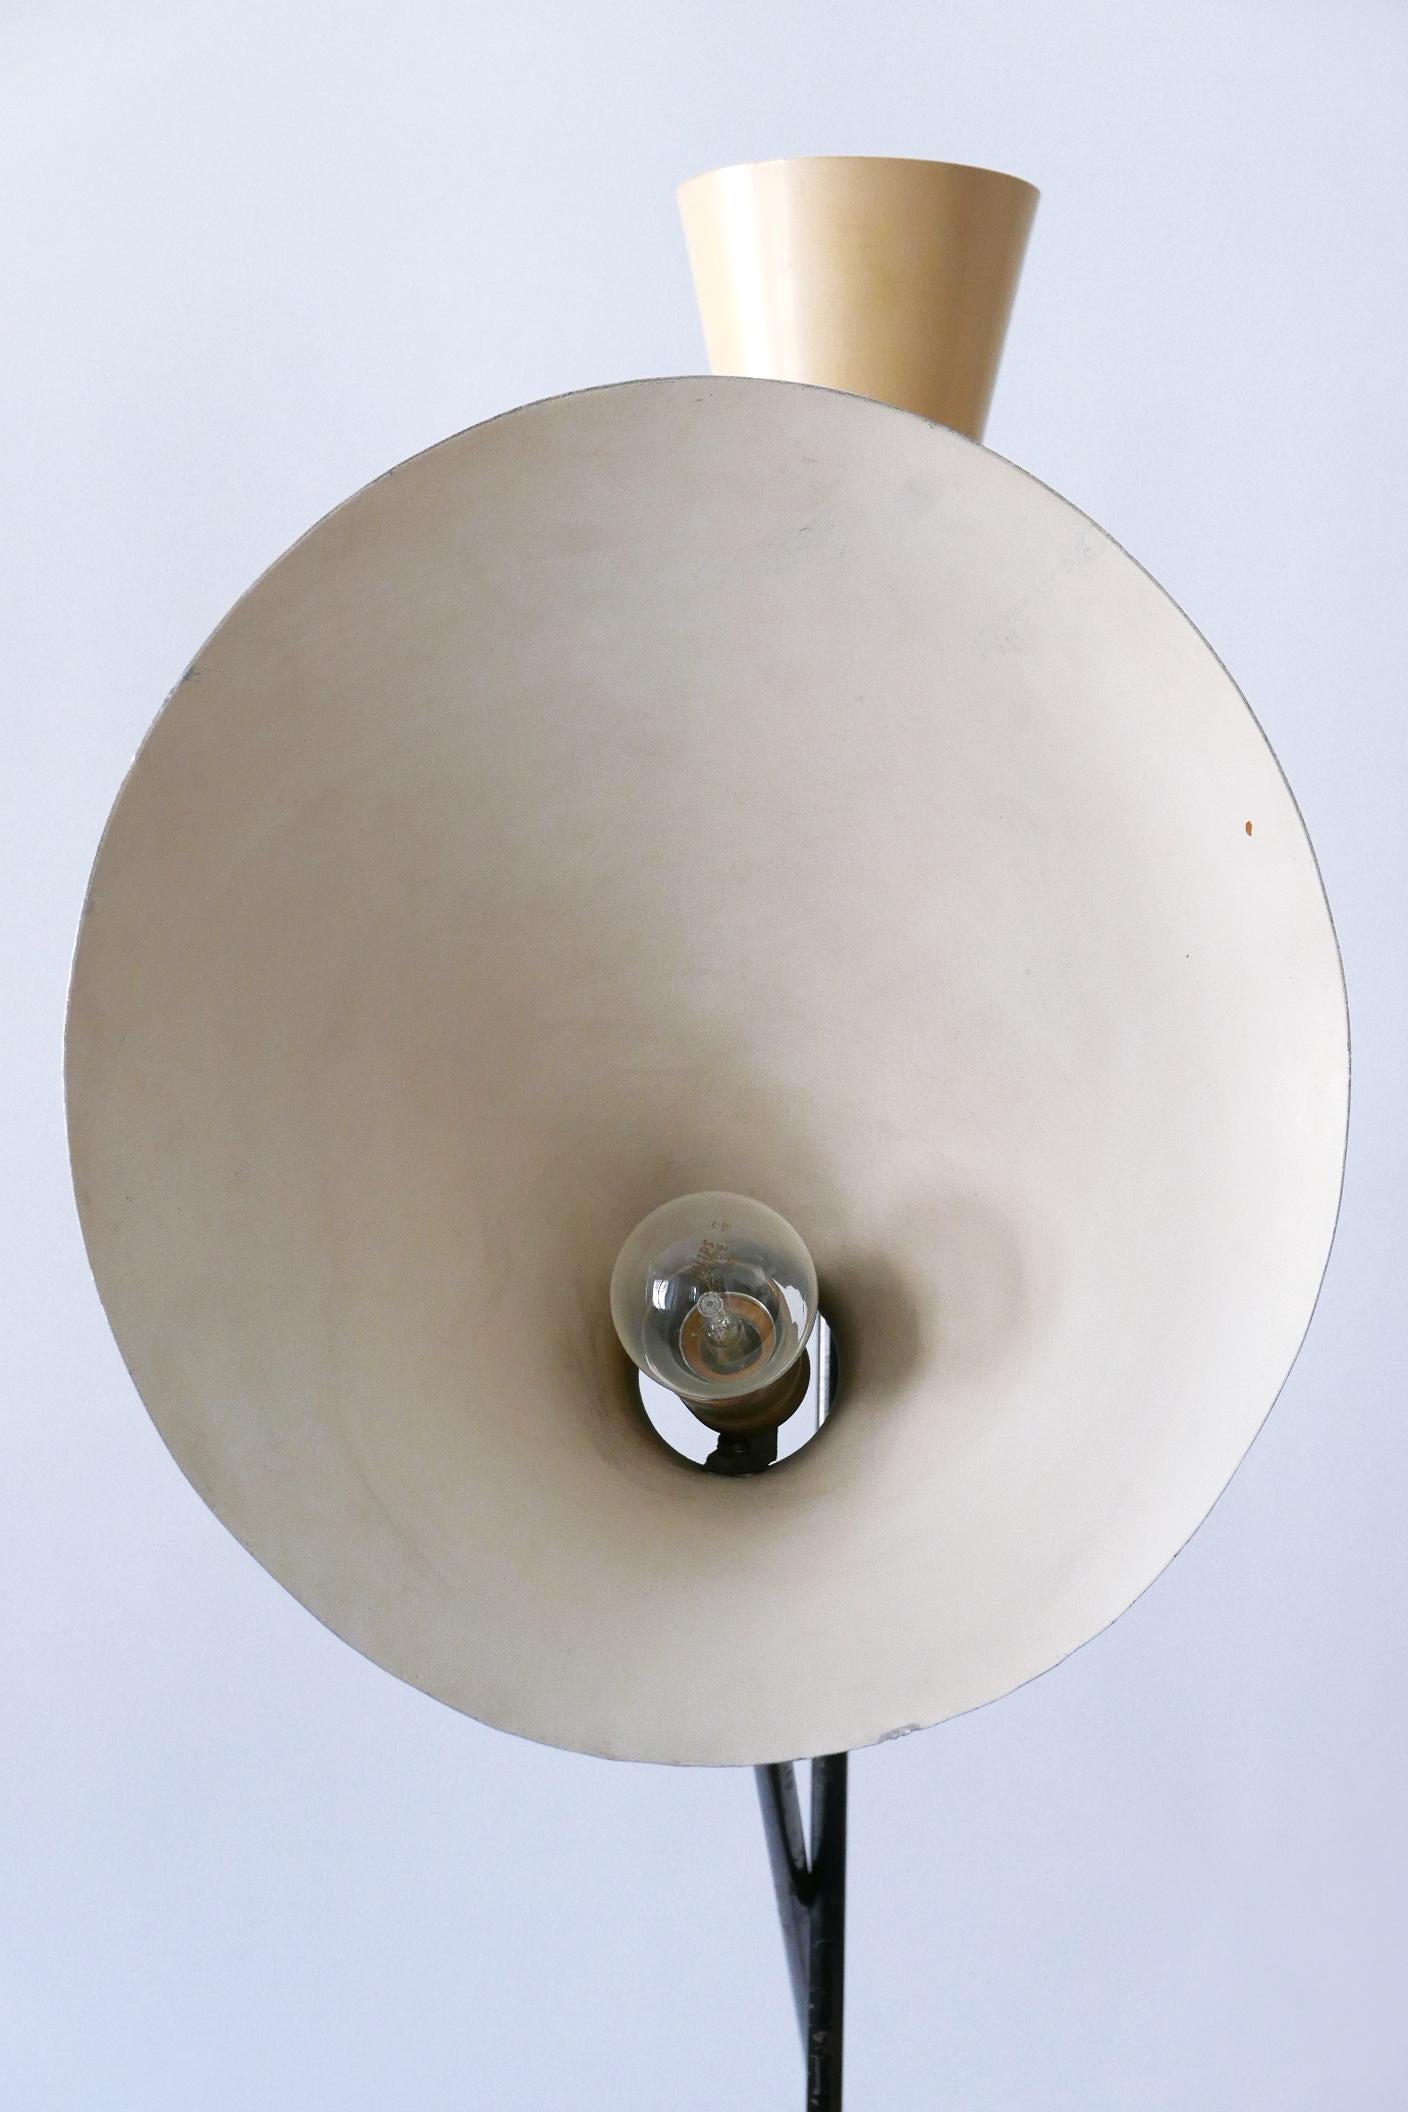 Rare Iconic Mid-Century Modern Floor Lamp by Prof. Carl Moor for BAG Turgi 1950s For Sale 10